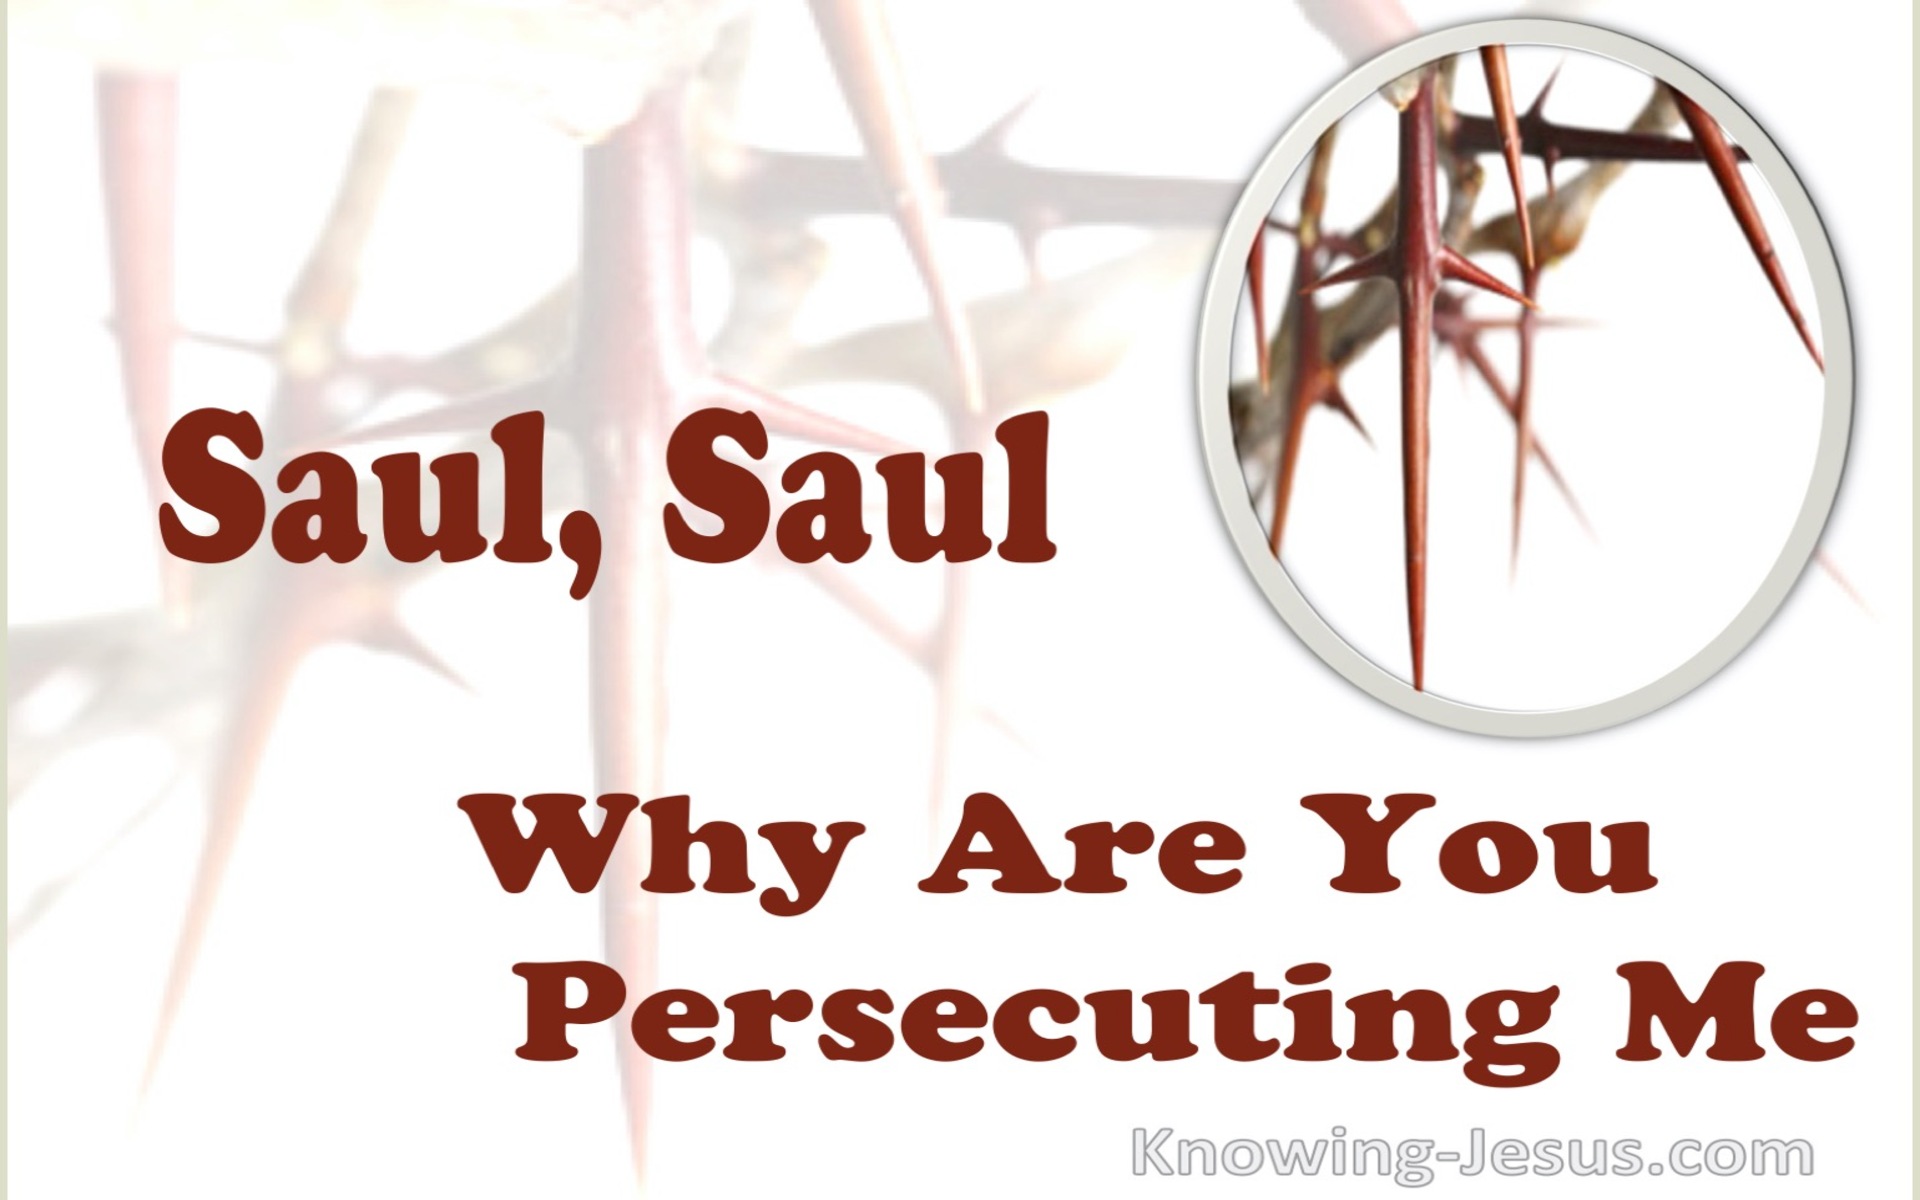 Acts 26:14 Saul, Saul Why Are You Persecuting Me (maroon)